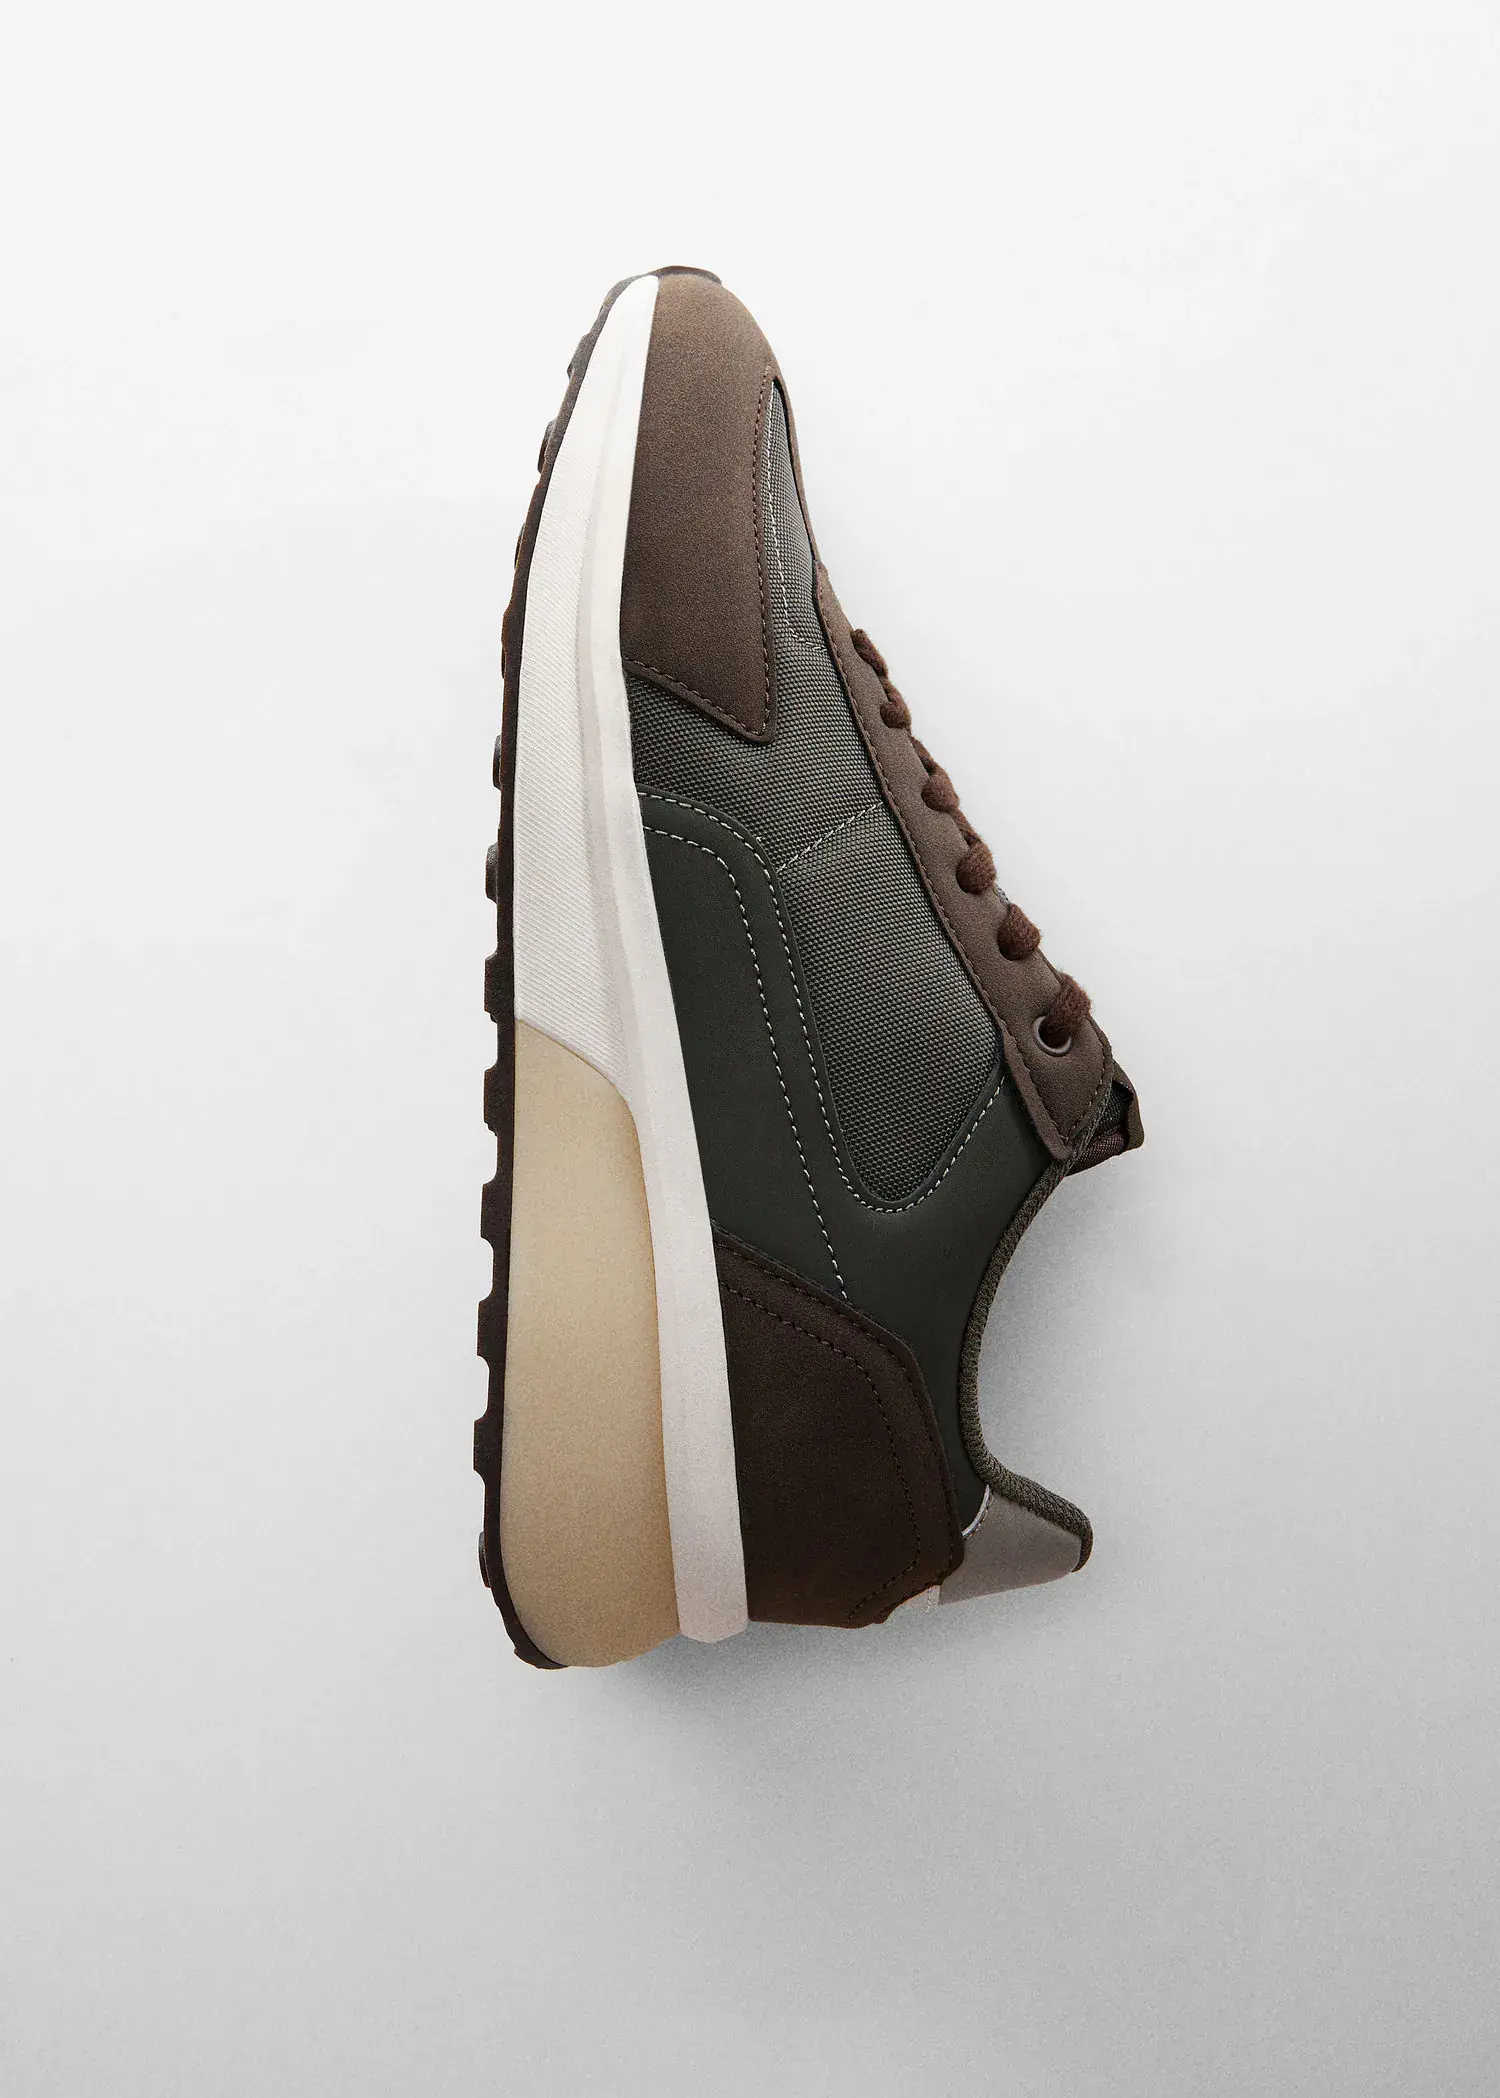 Mango Leather mixed sneakers. a pair of brown and white sneakers on a white surface. 